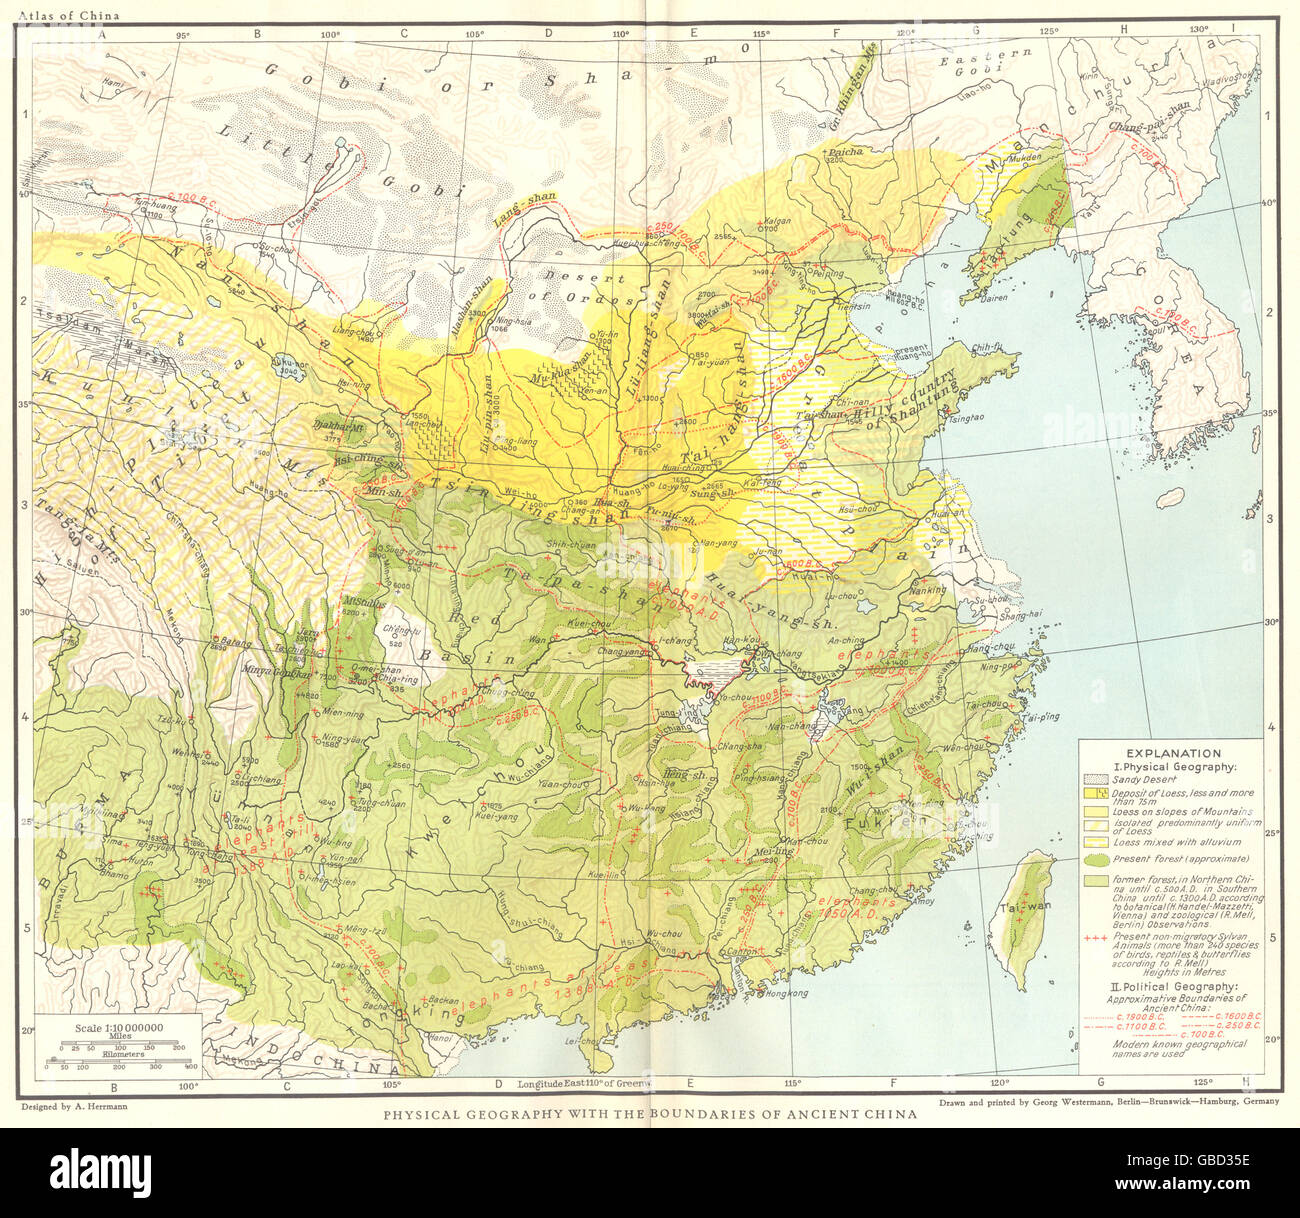 CHINA: Physical Geography with the boundaries of Ancient China, 1935 old map Stock Photo